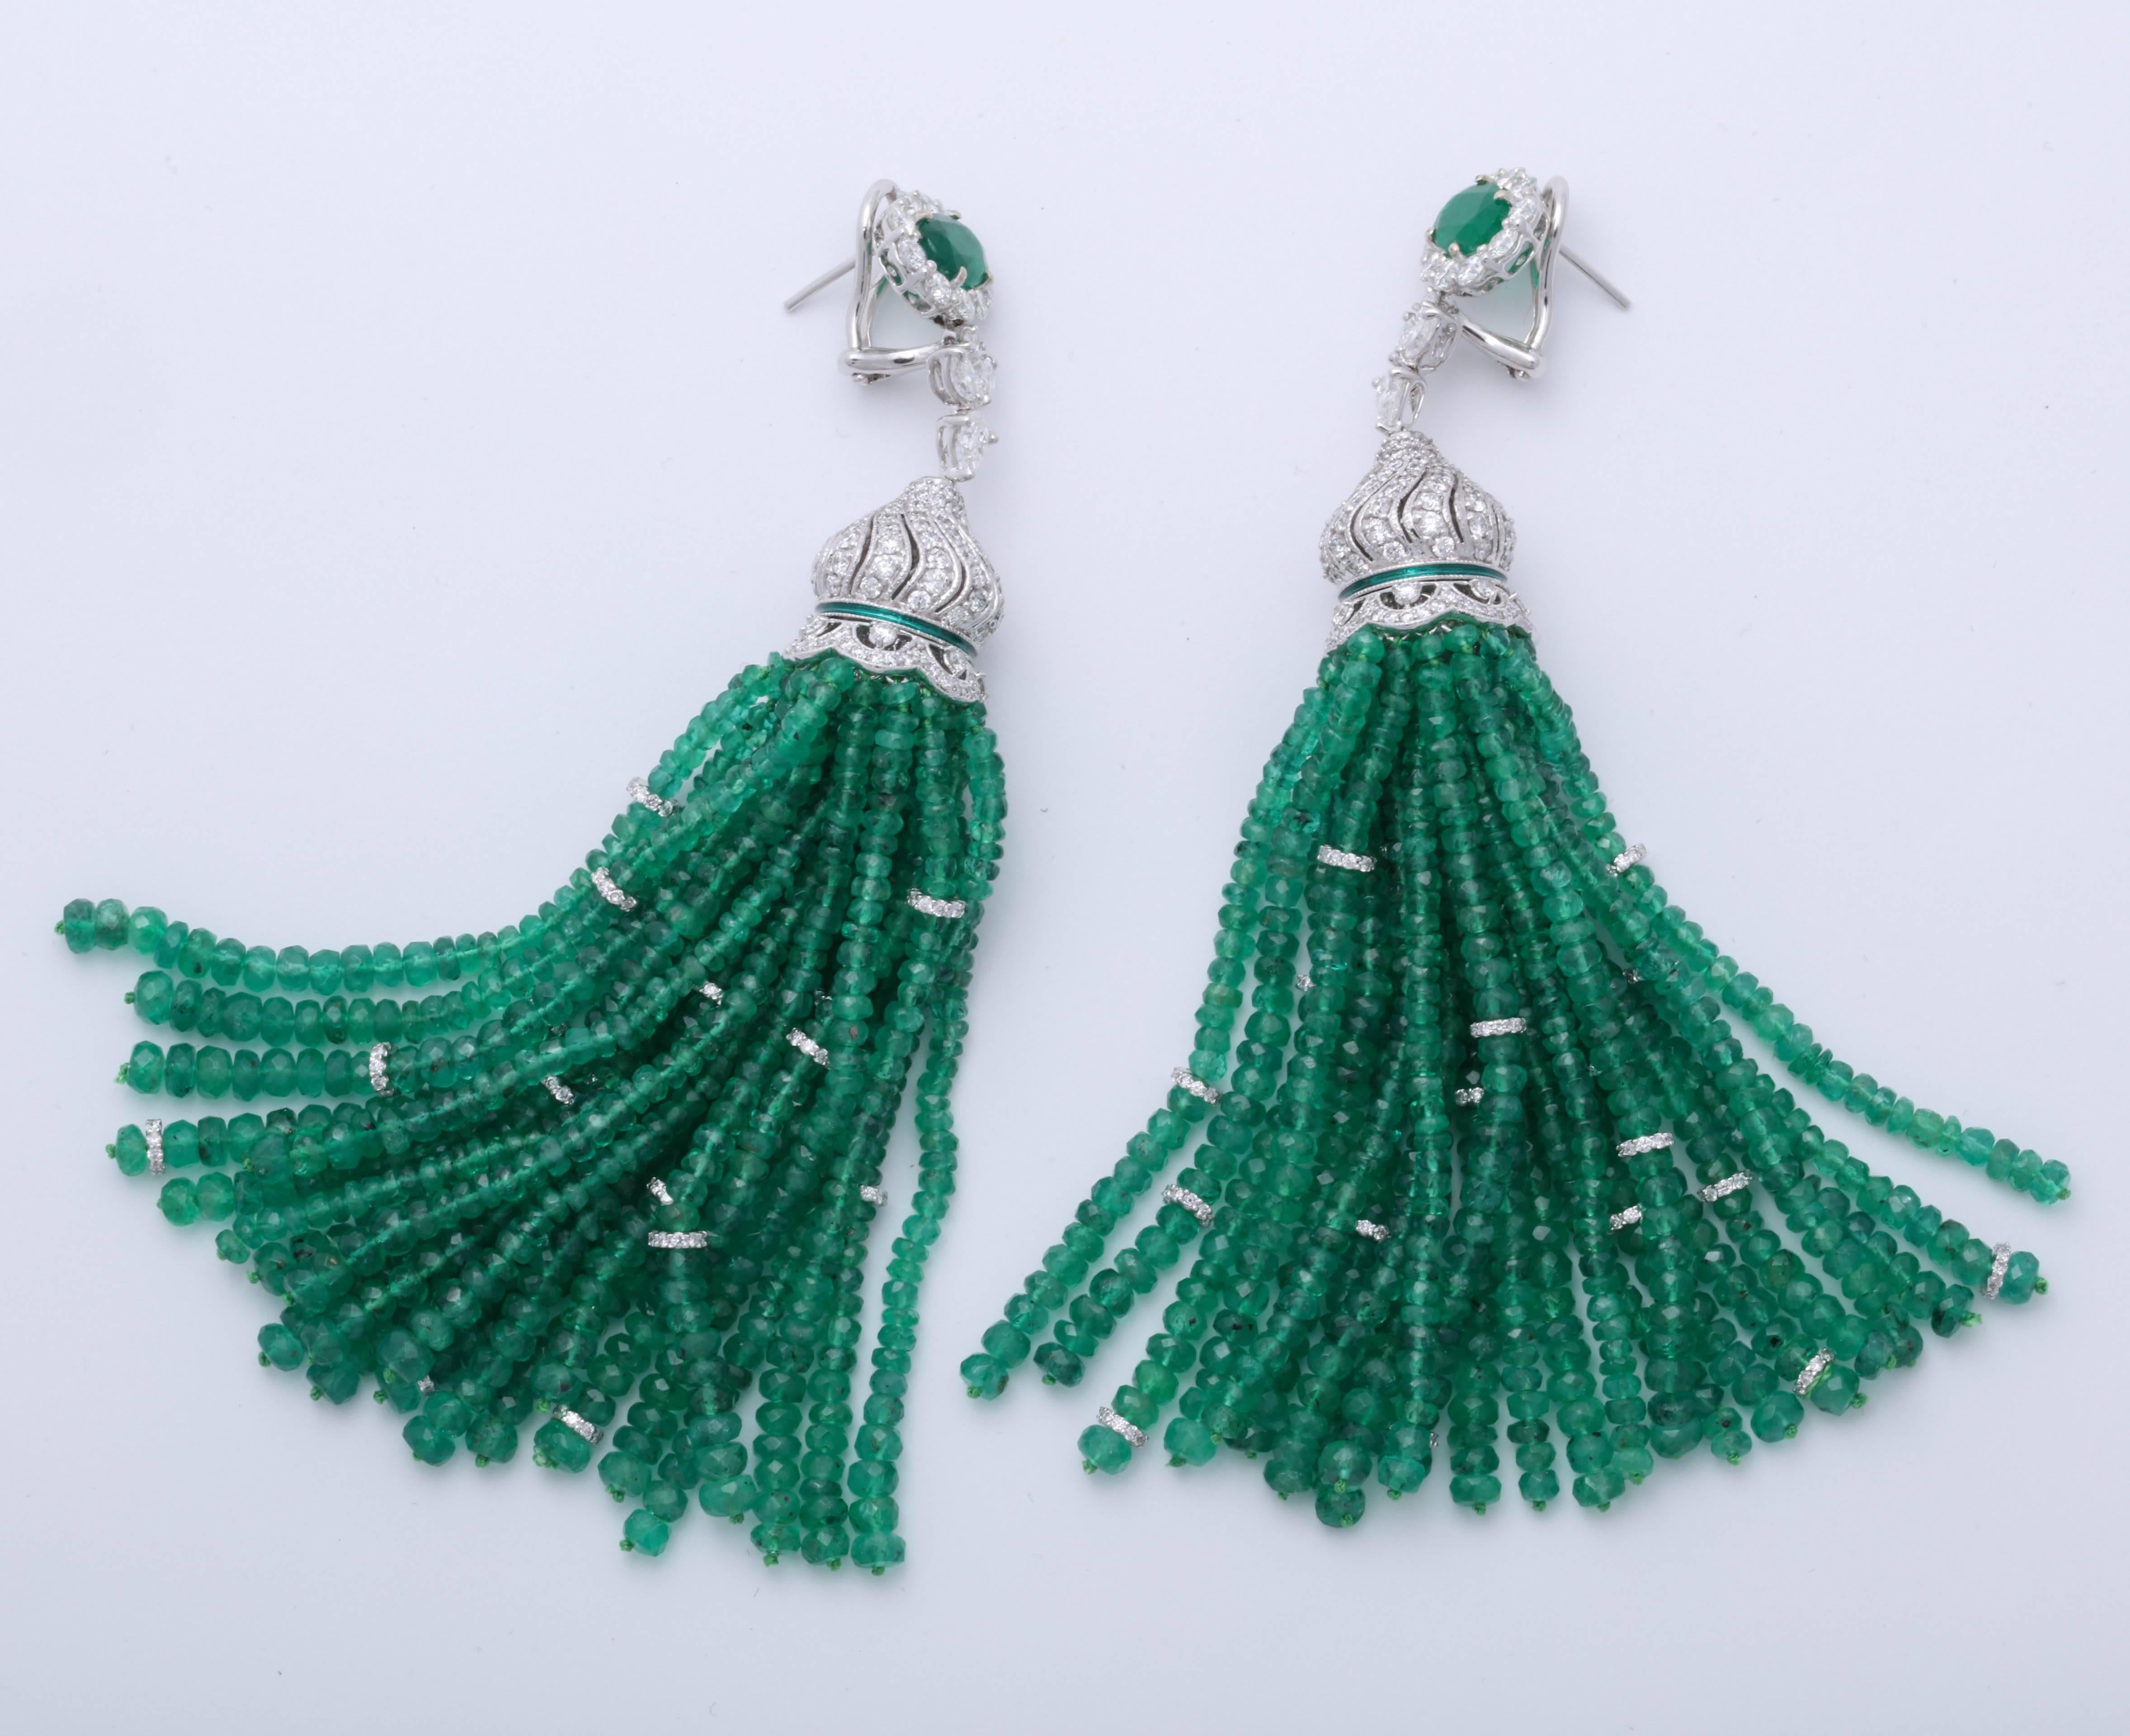 
Fabulous statement earrings! 

Over 200 carats of green emerald!    9.66 carats of diamonds!

Just over 4 inches in length 

18k white gold 

A one of a kind earring that can be worn casually or to a black tie affair. 